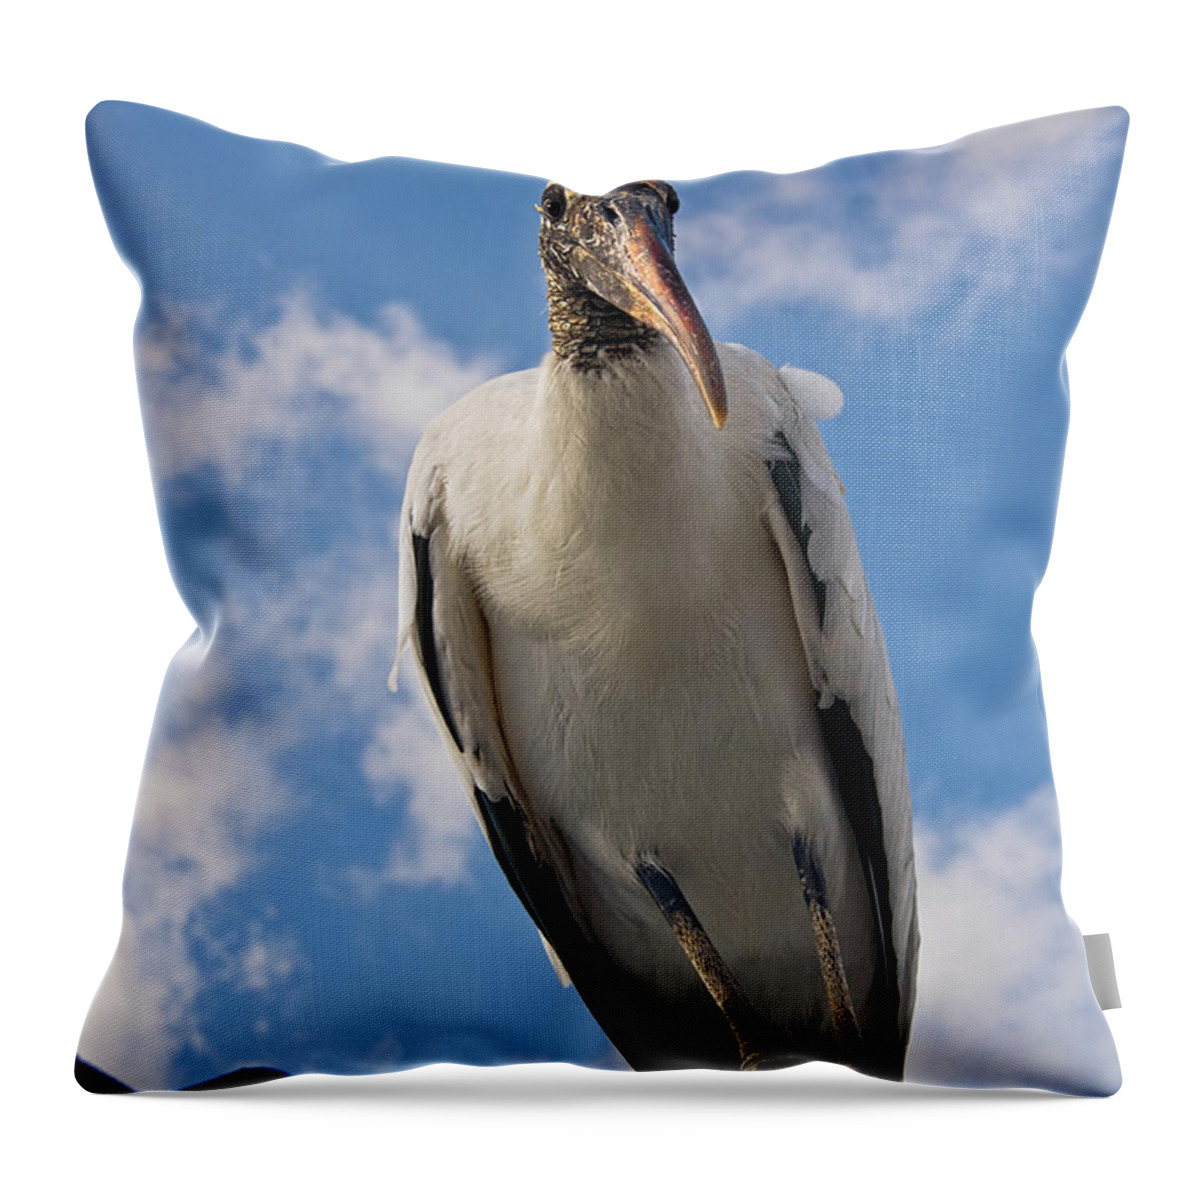 Stork Throw Pillow featuring the photograph Do I Know You by Christopher Holmes